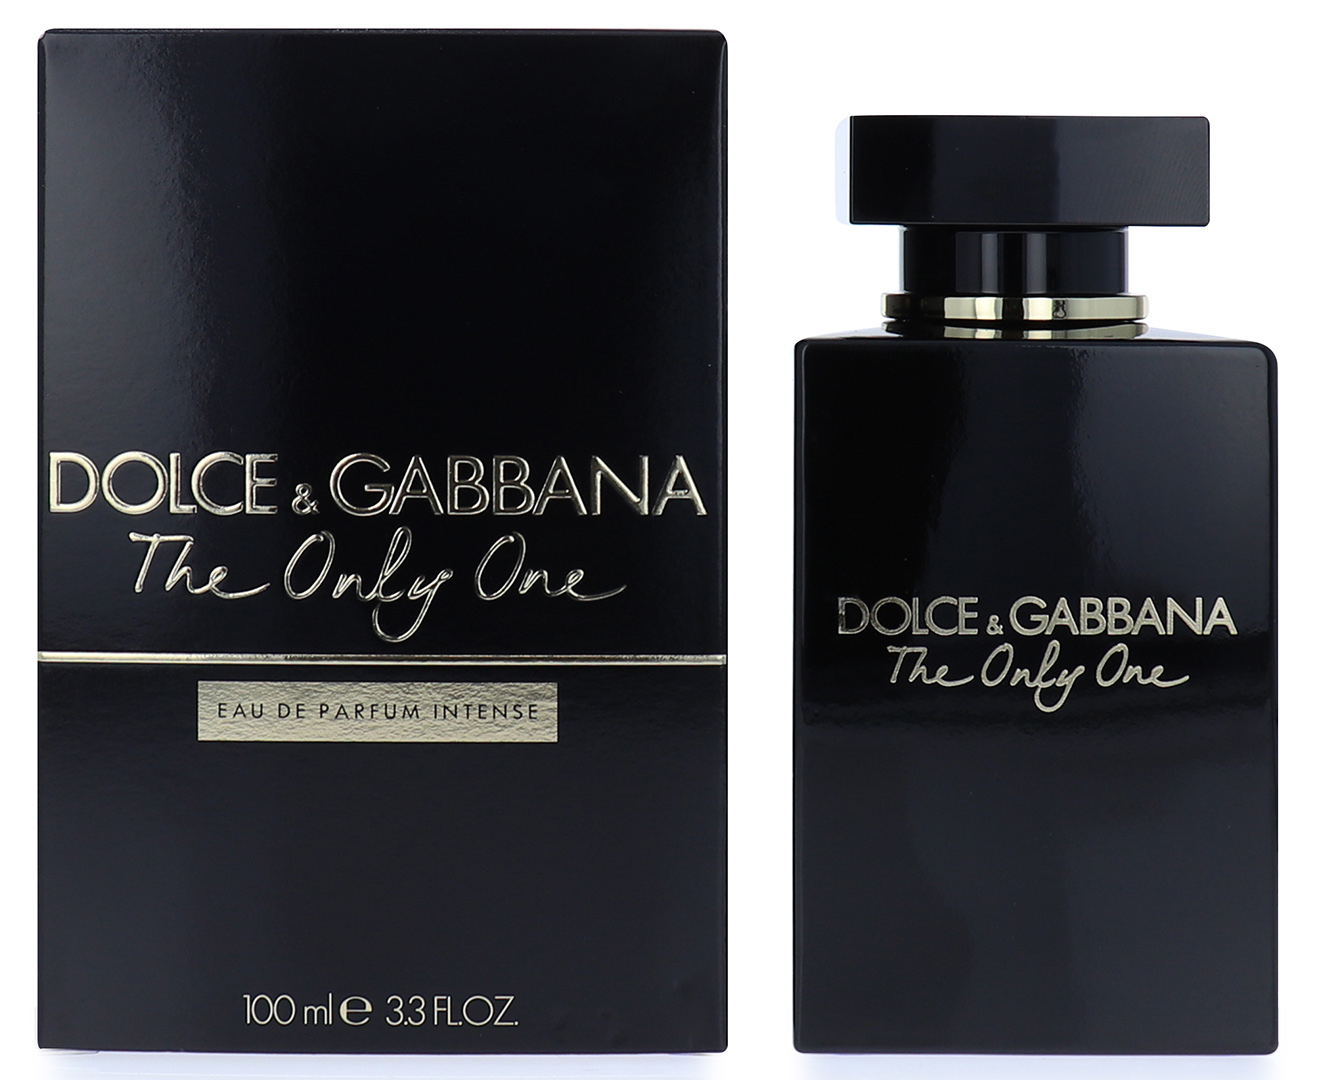 The only one intense dolce. Дольче Габбана Интенс. Dolce Gabbana the only one intense. Дольче Габбана Онли он. Дольче Габбана Интенсе набор.